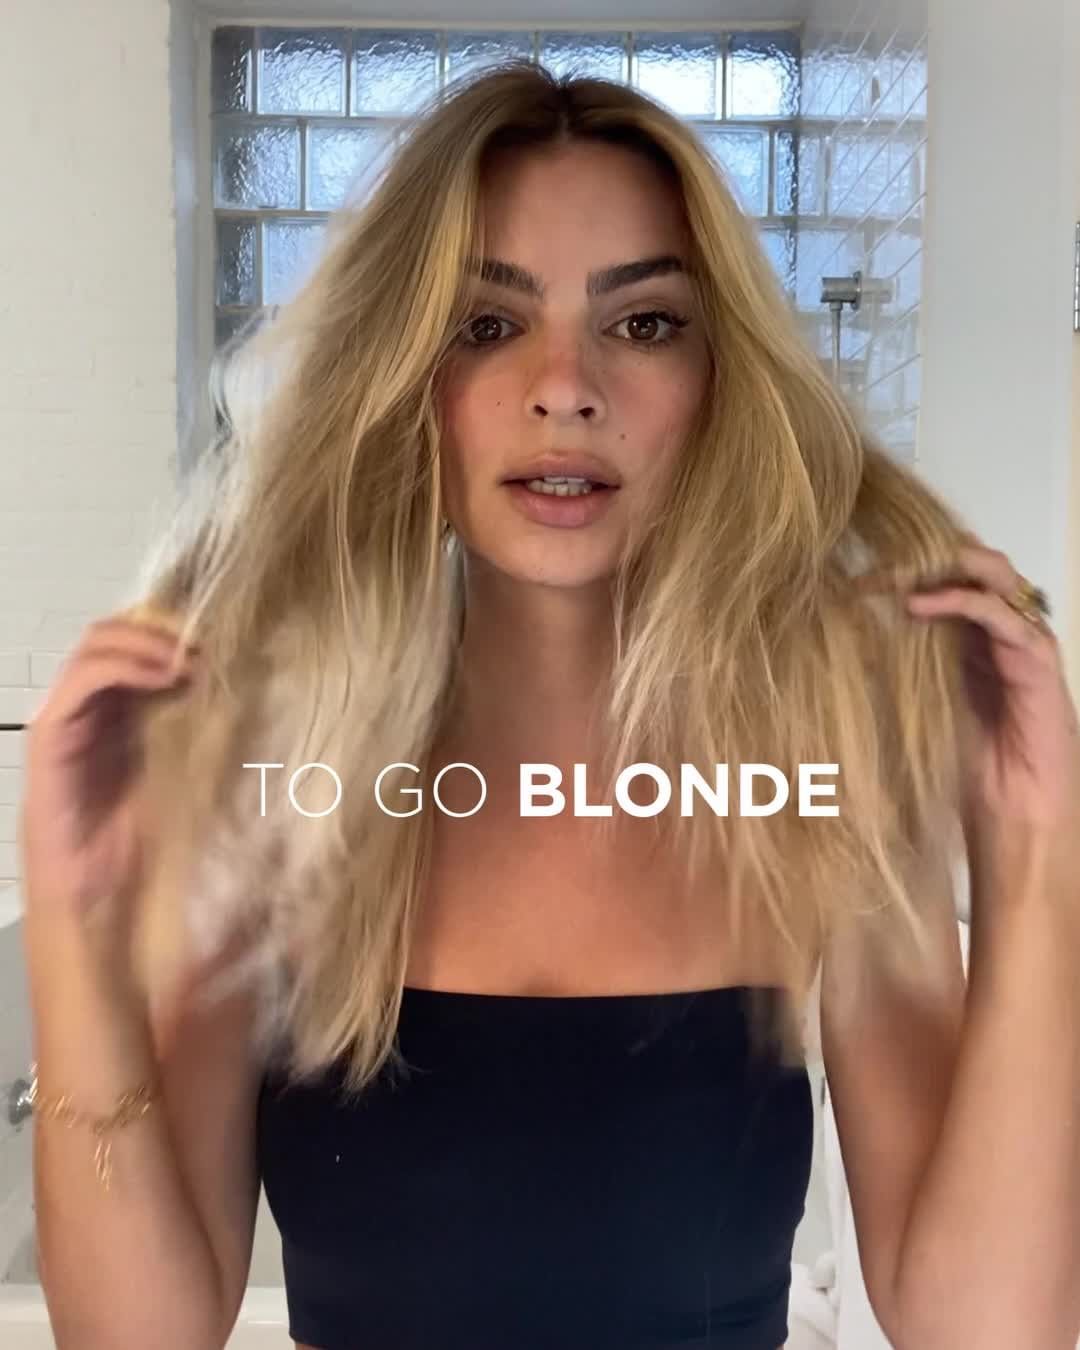 Kerastase - Blonding has no limits when you have the right hair care routine to preserve the health of your hair!

Dare to go blonde as @emrata did

#YouDareWeCare #BlondAbsolu #Kerastase #KerastaseCl...